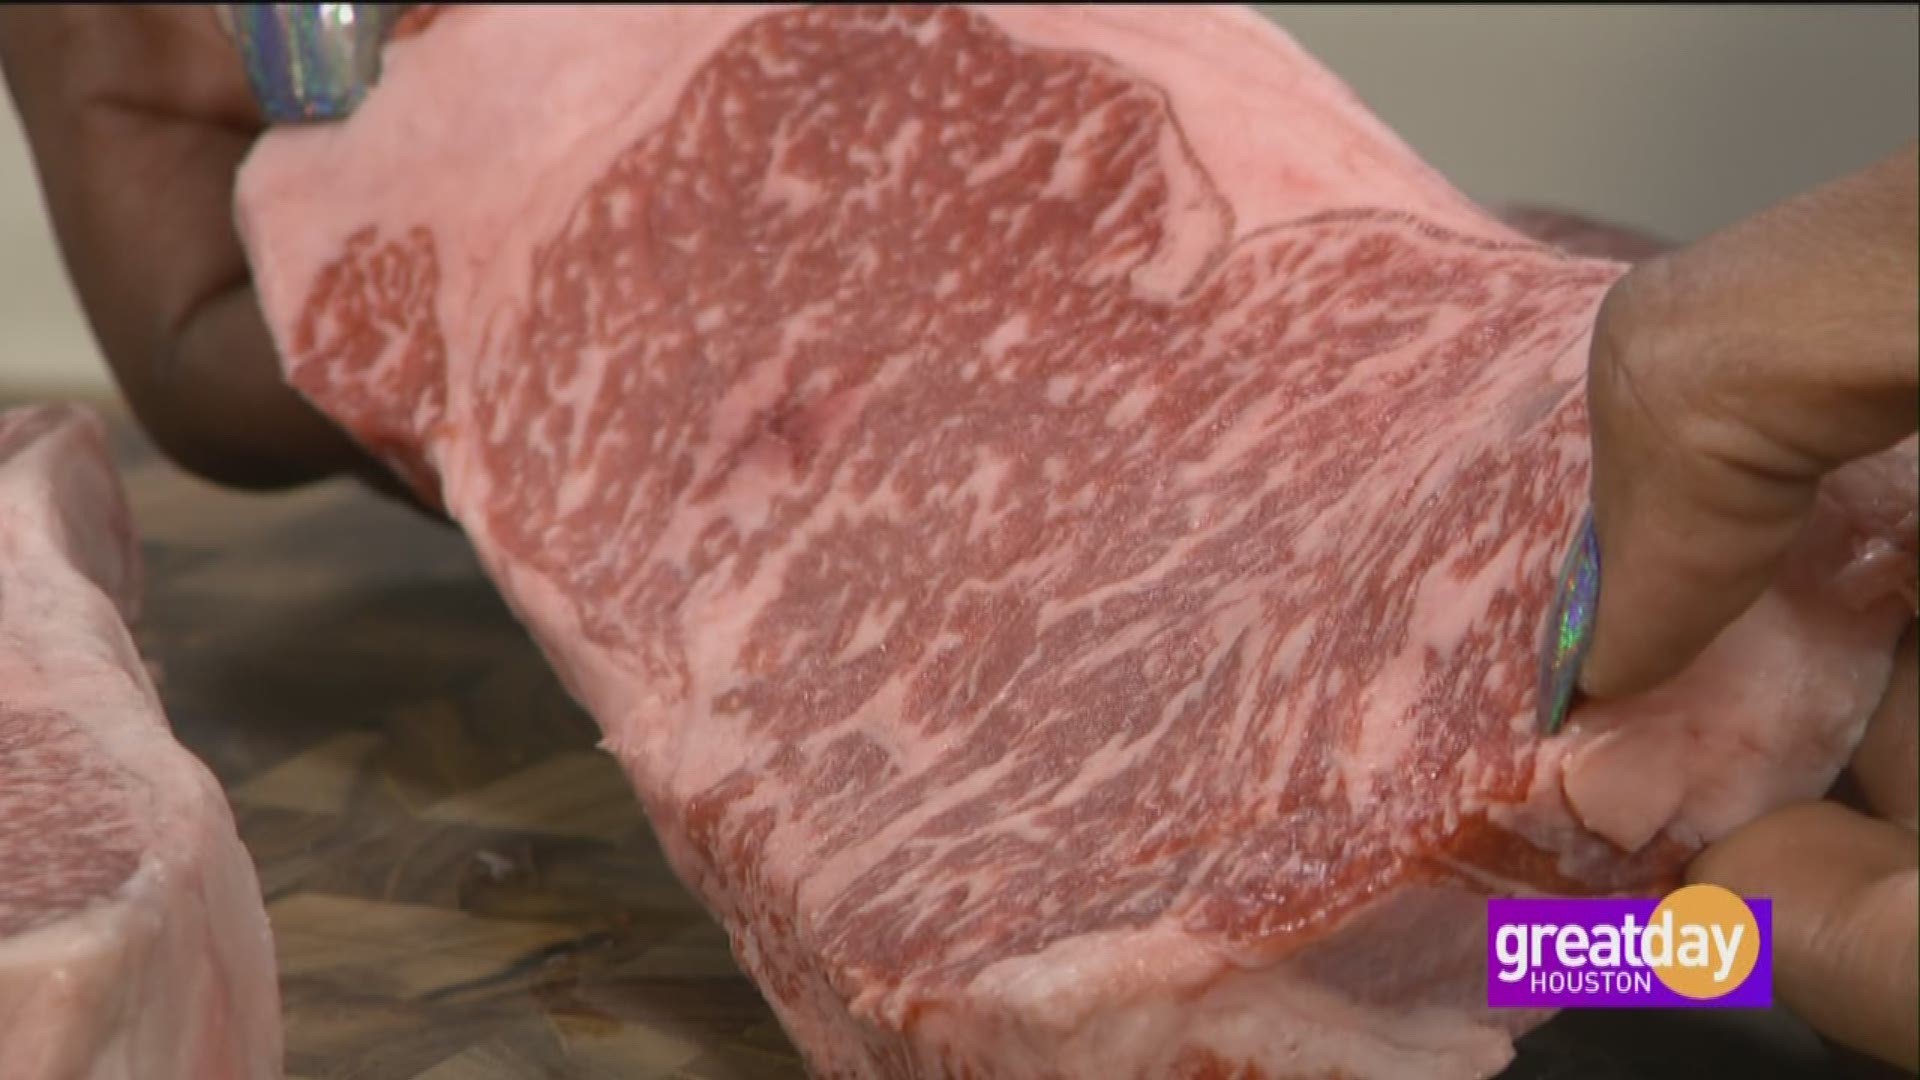 Find out the difference between "Wet" and "Dry" beef aging